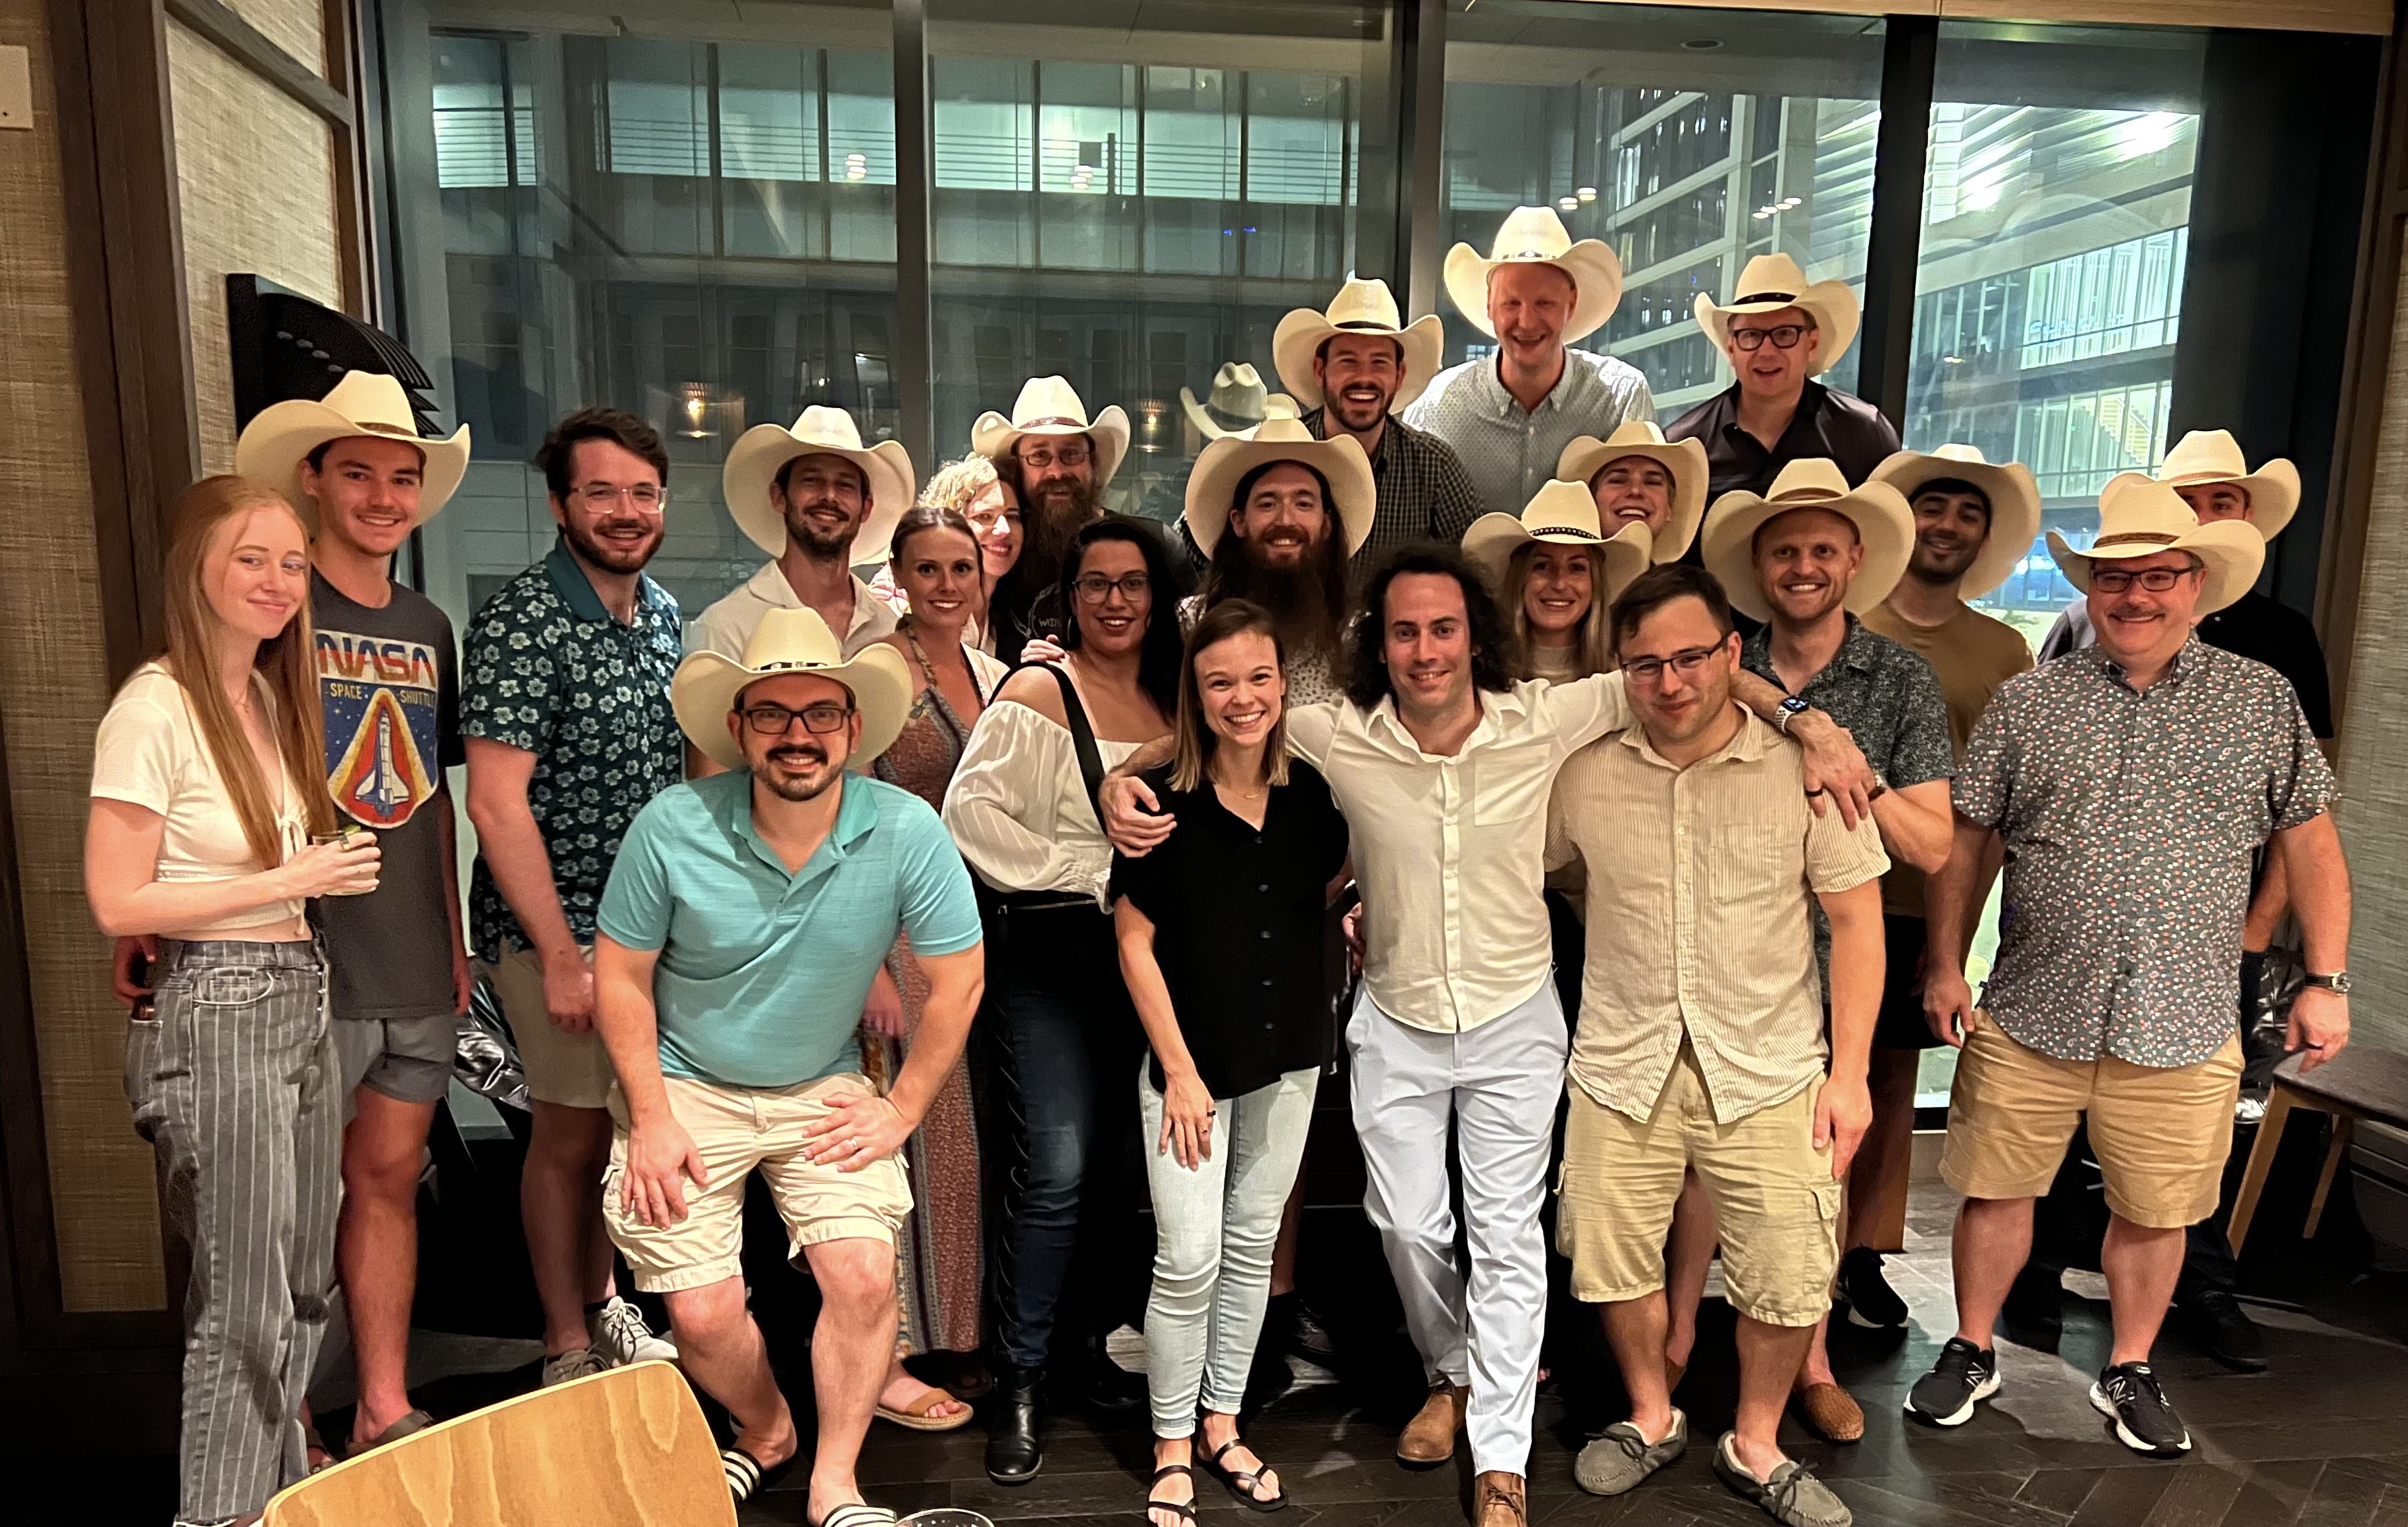 group photo of Unit 410 employees with most wearing white cowboy hats